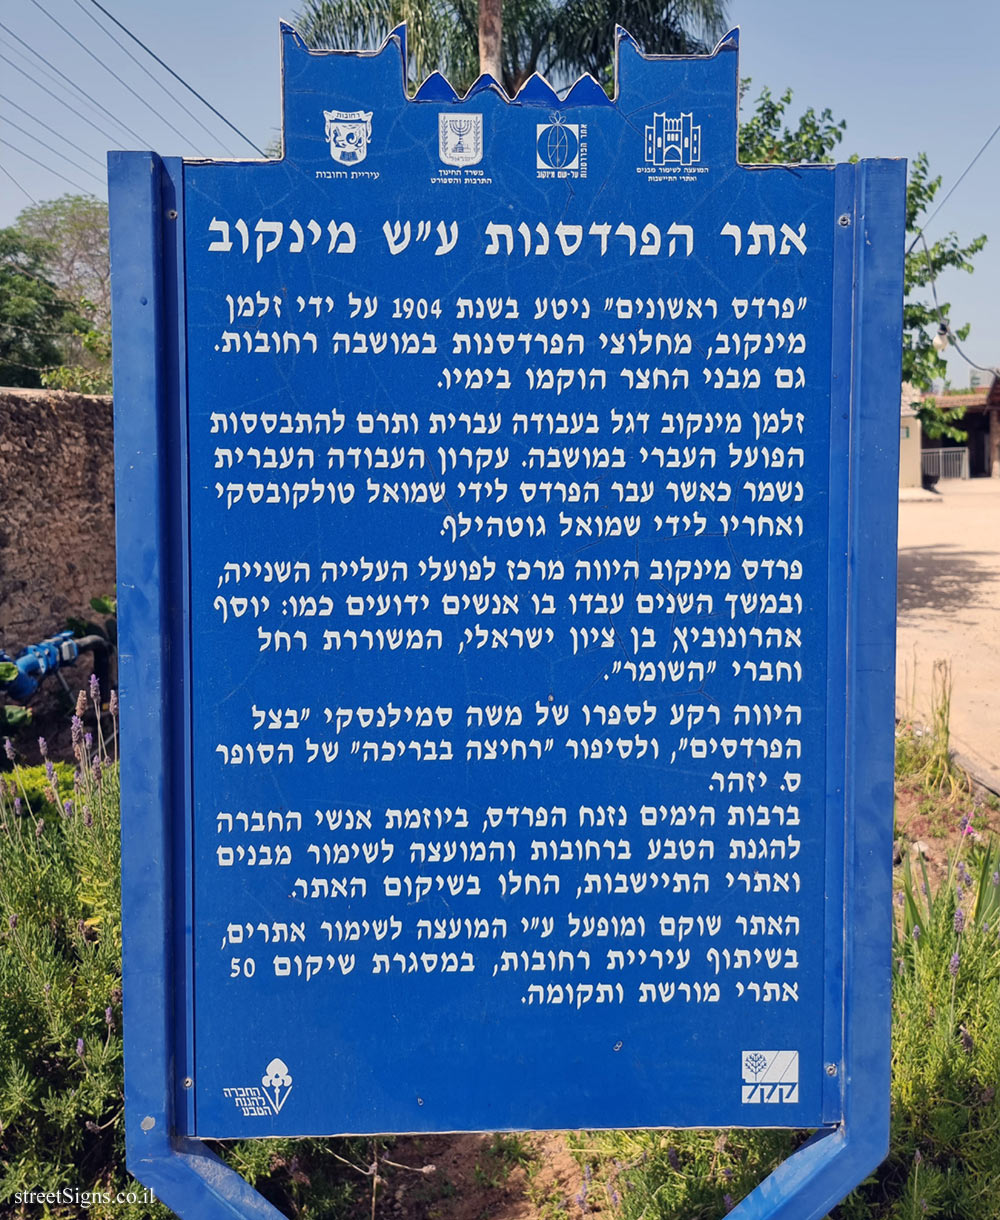 Rehovot - Heritage Sites in Israel - The orchard site named after Minkov